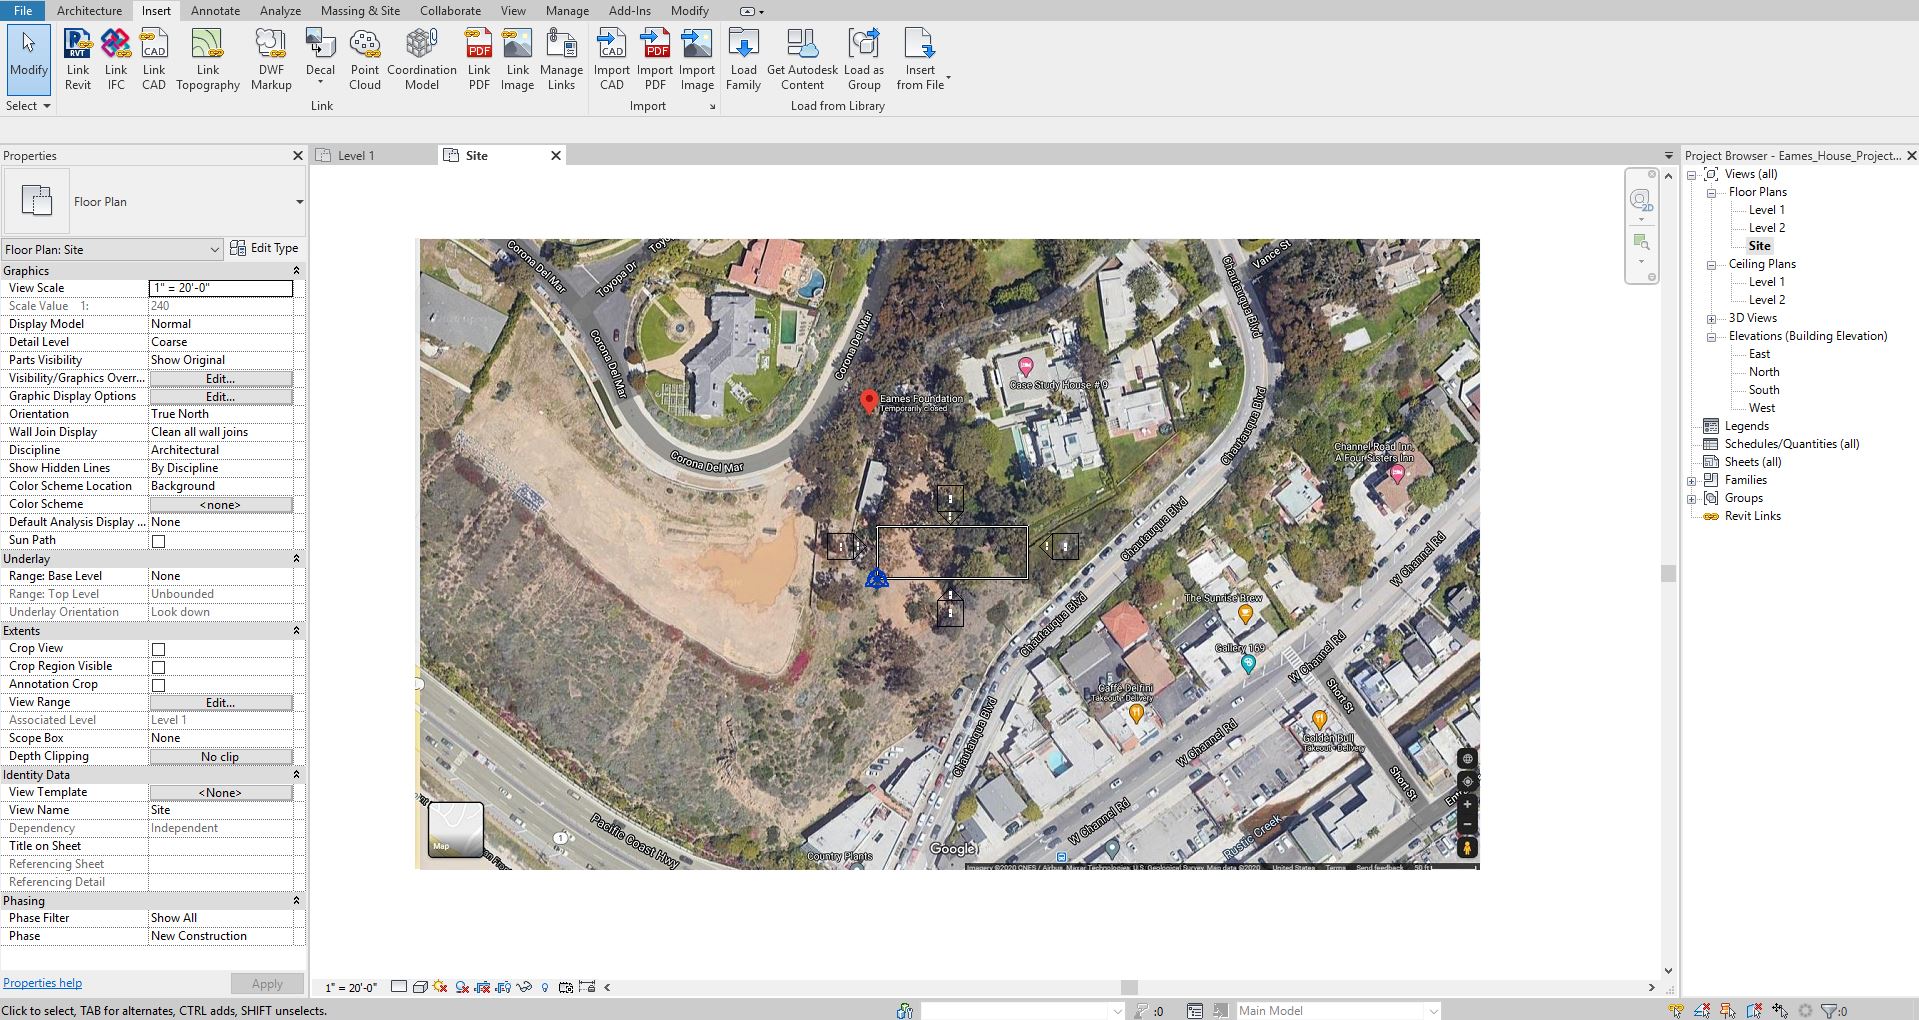 This image shows the screen shot that the google map image was added.